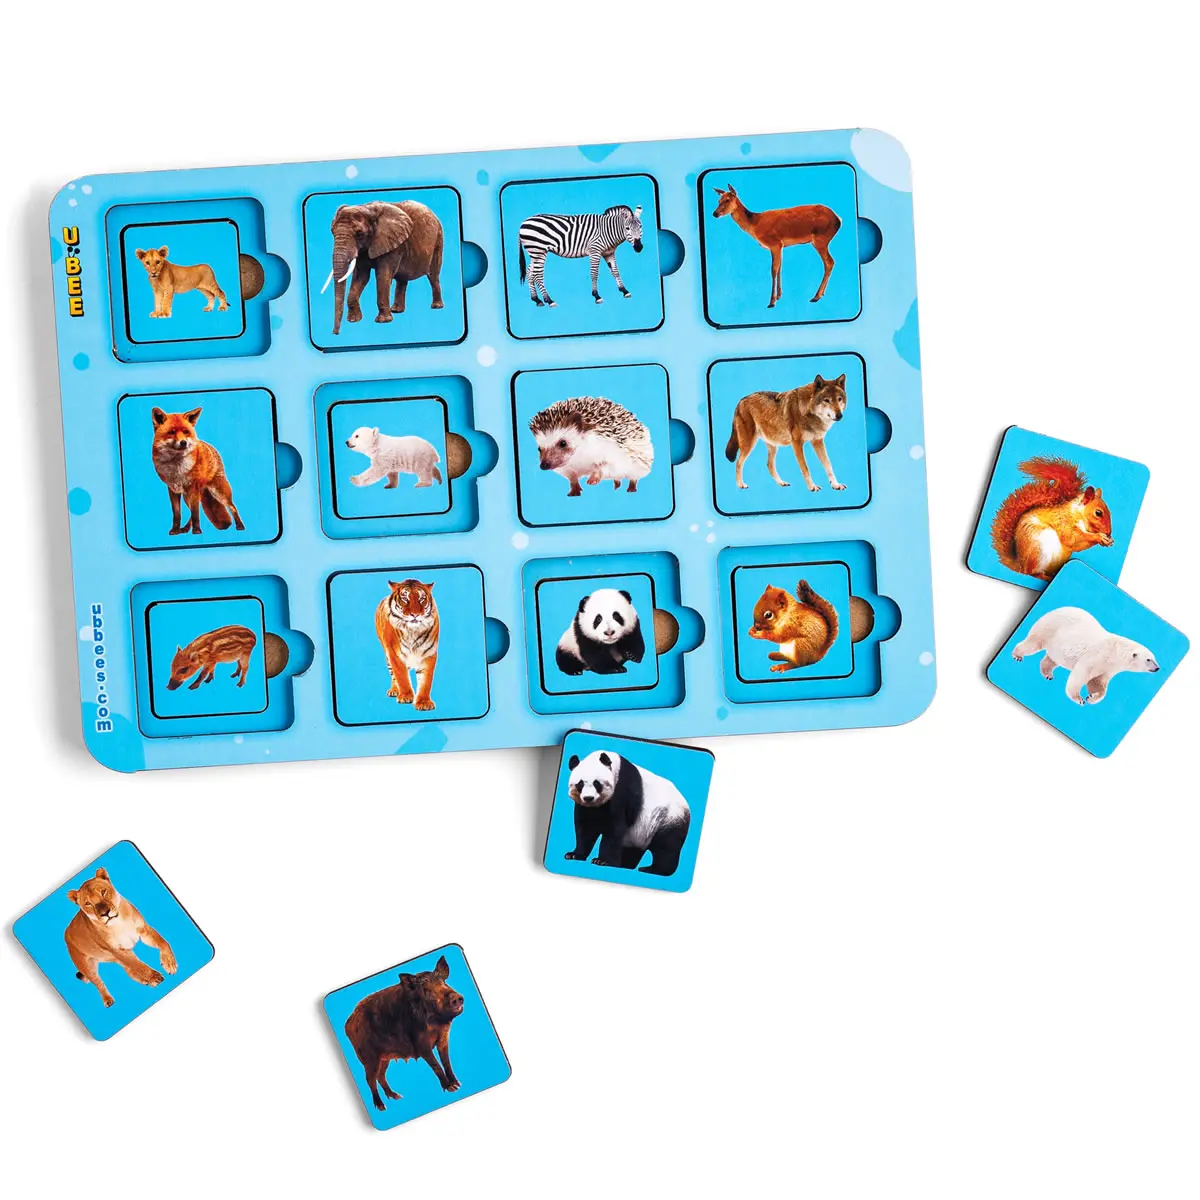 Sorting-puzzle "Mother and baby" Wild Animals (picture)